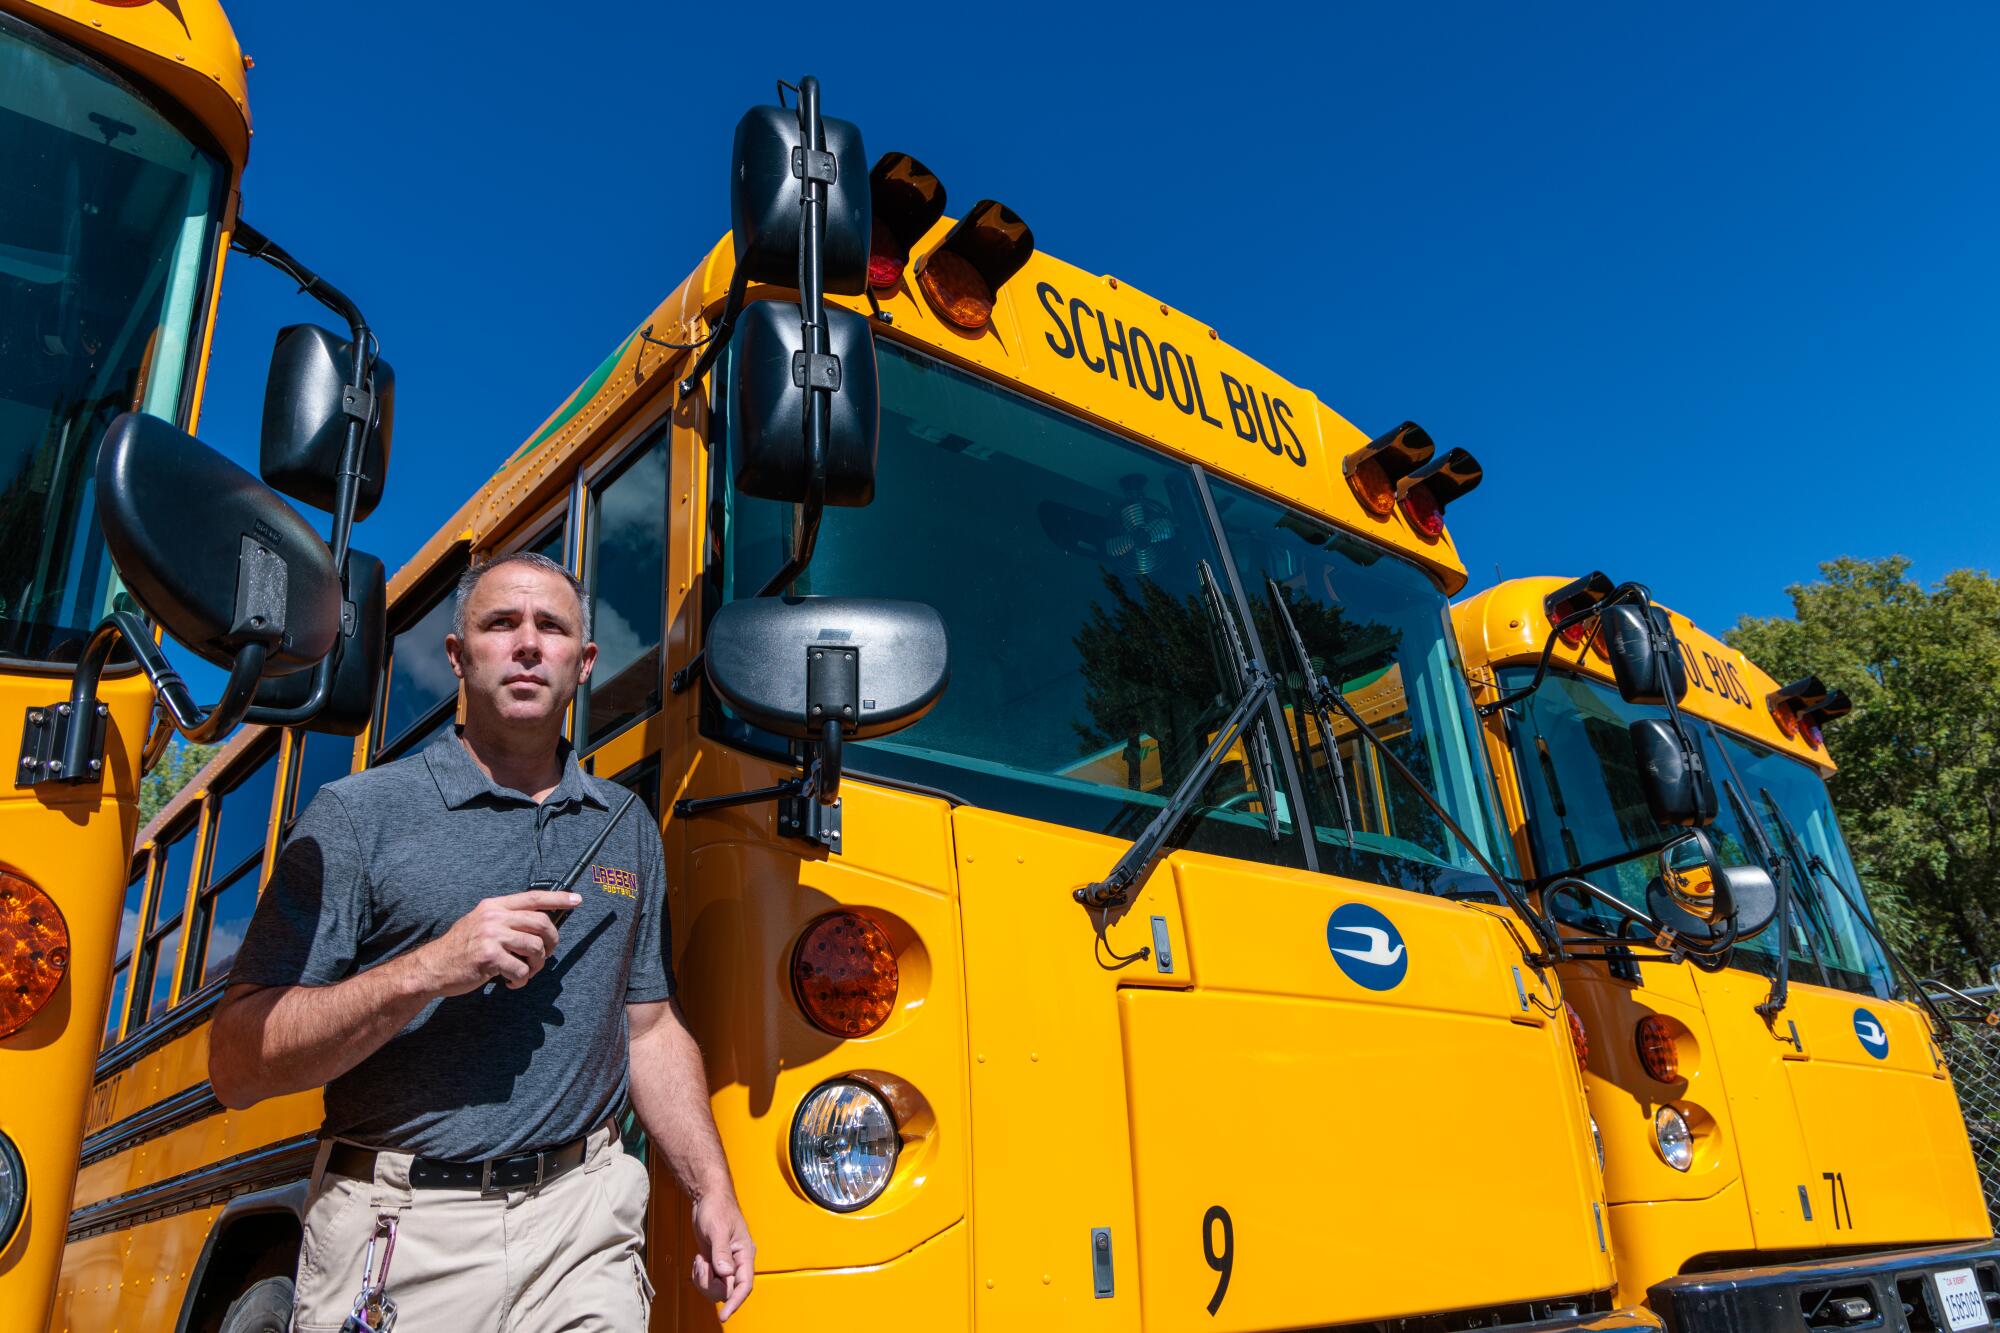 A man stands near a row of parked school buses.